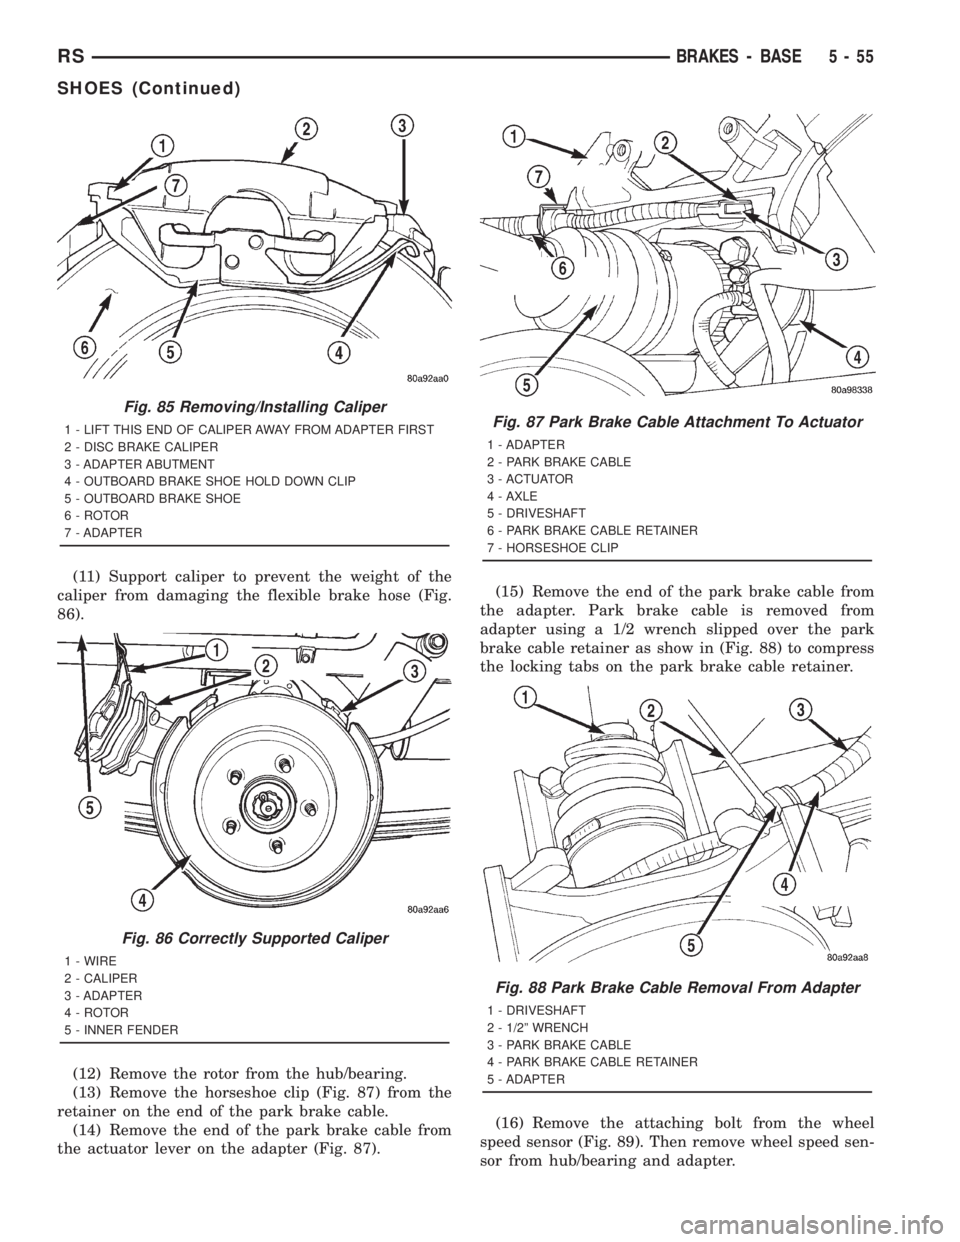 CHRYSLER VOYAGER 2001 Workshop Manual (11) Support caliper to prevent the weight of the
caliper from damaging the flexible brake hose (Fig.
86).
(12) Remove the rotor from the hub/bearing.
(13) Remove the horseshoe clip (Fig. 87) from the